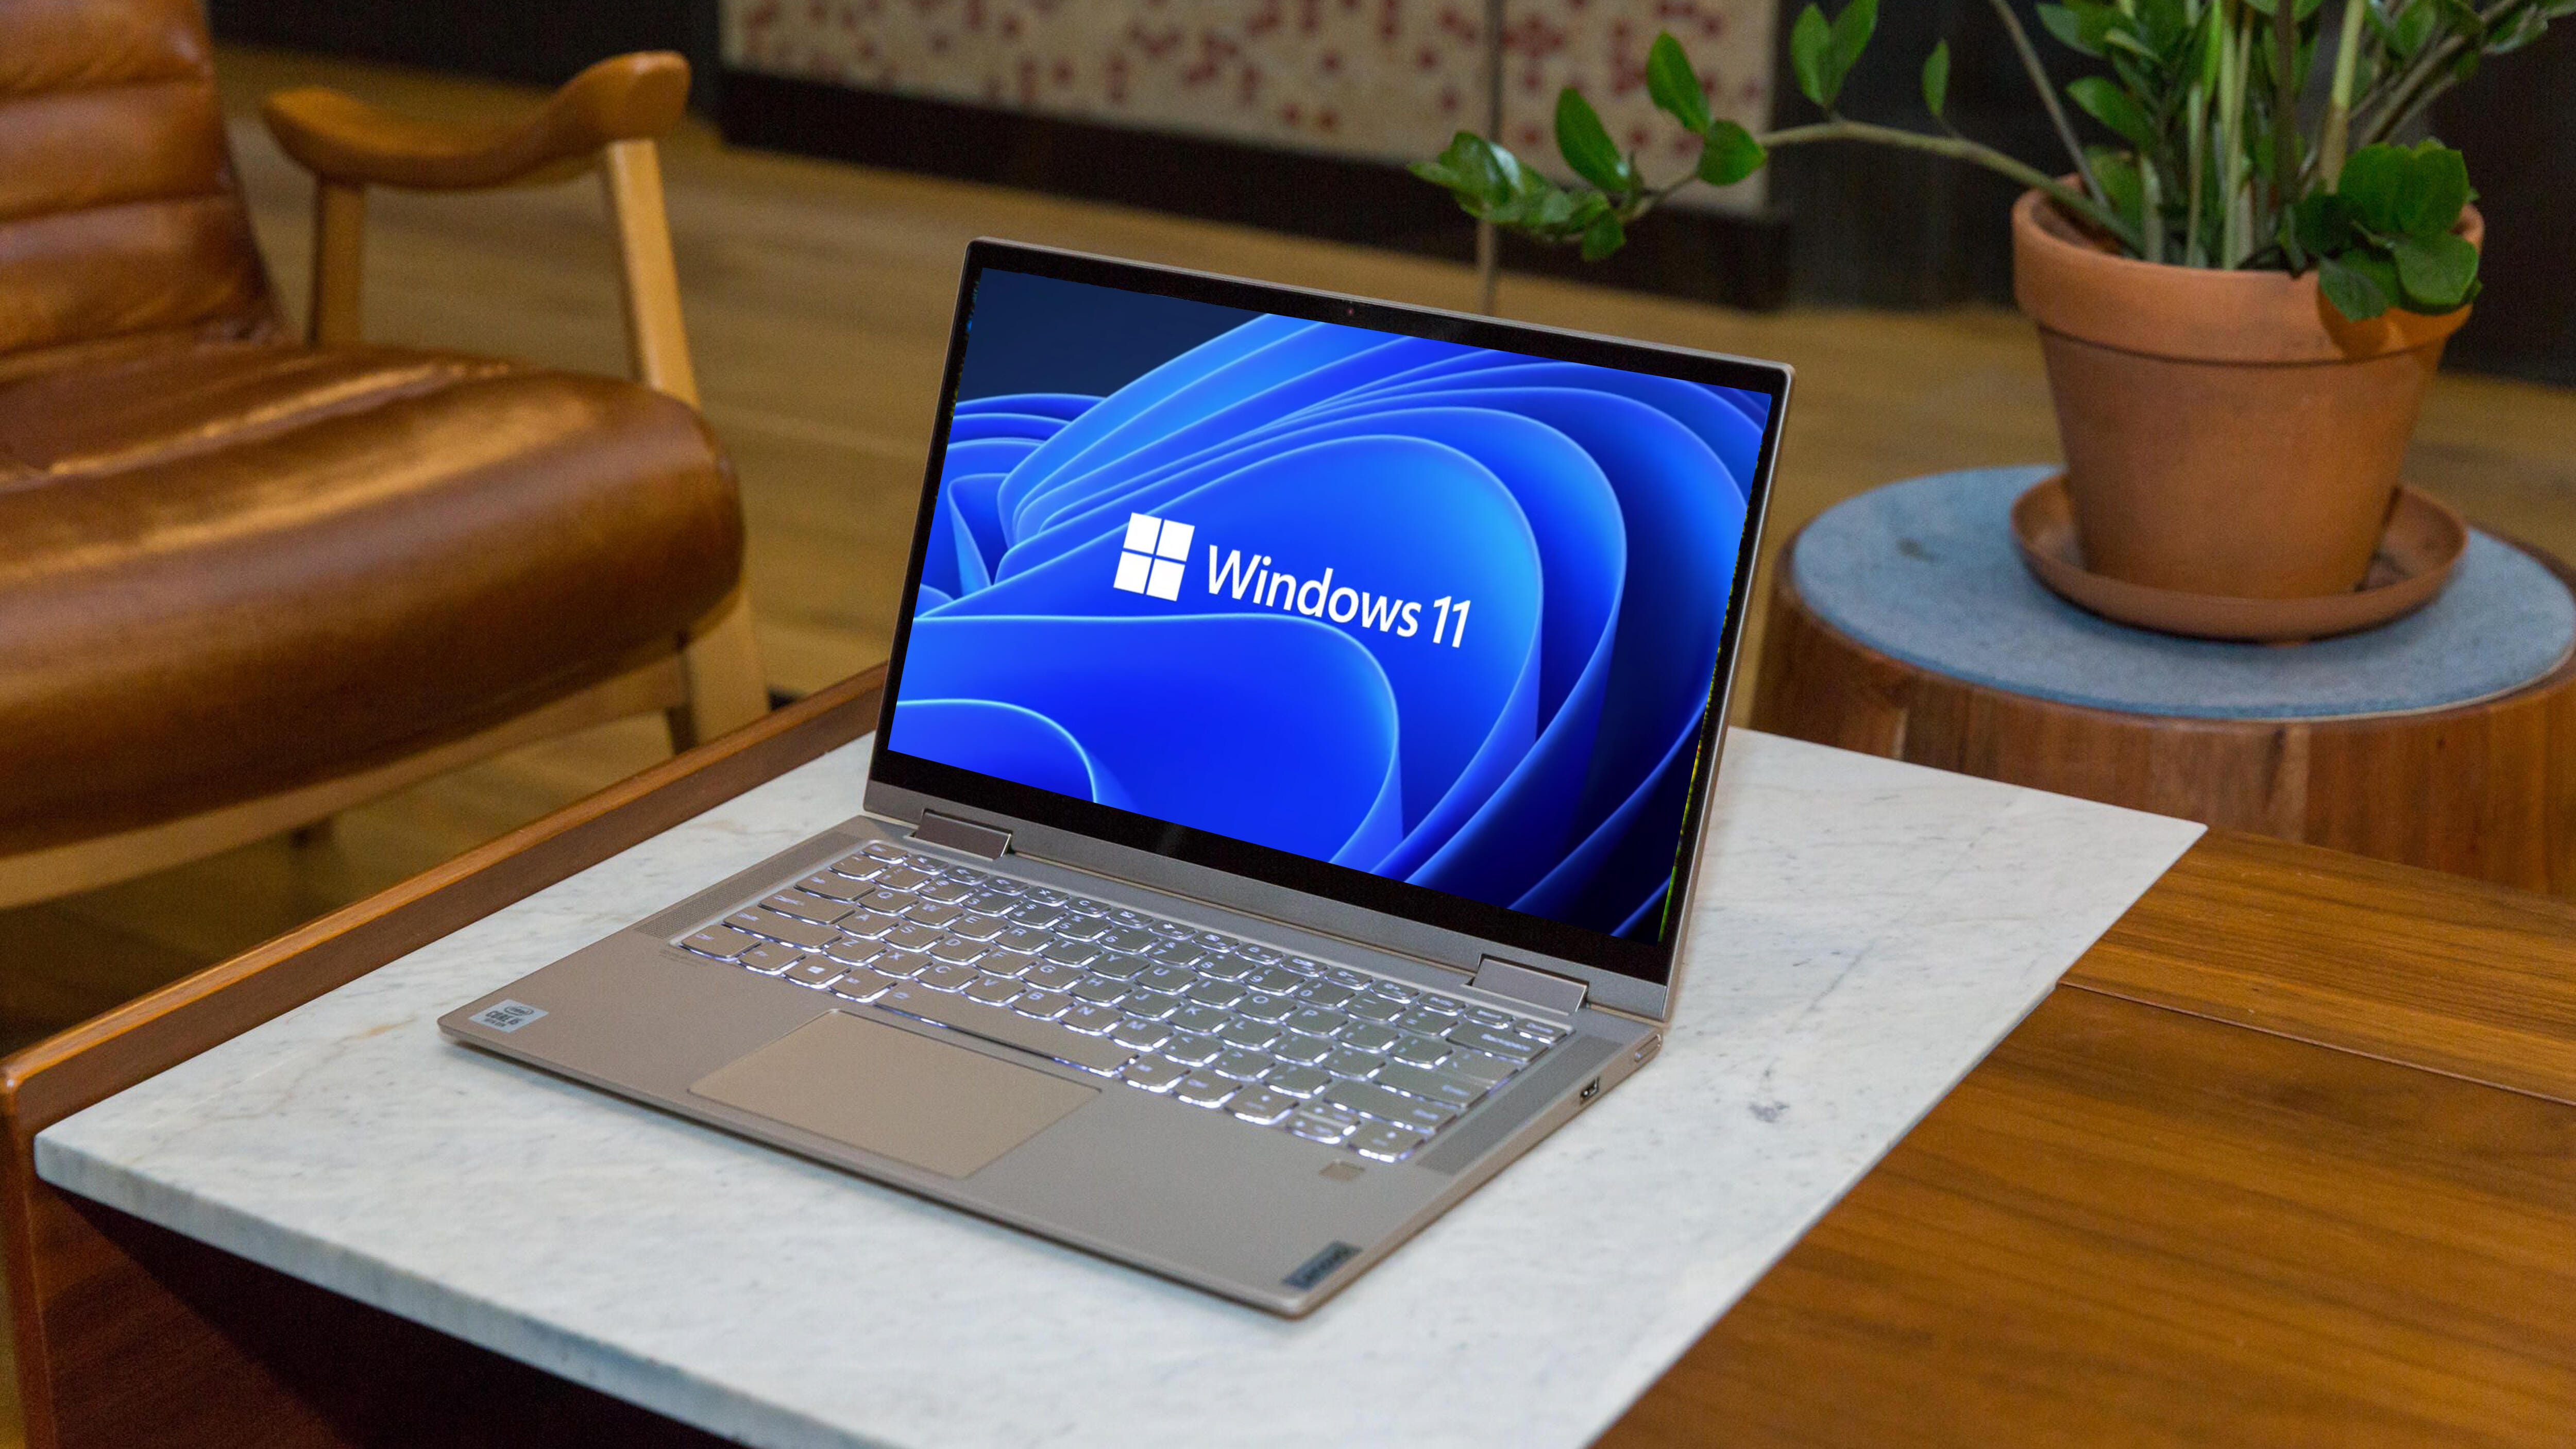 It’s now easier to create a Windows 11 install USB drive. Here’s what you need to know